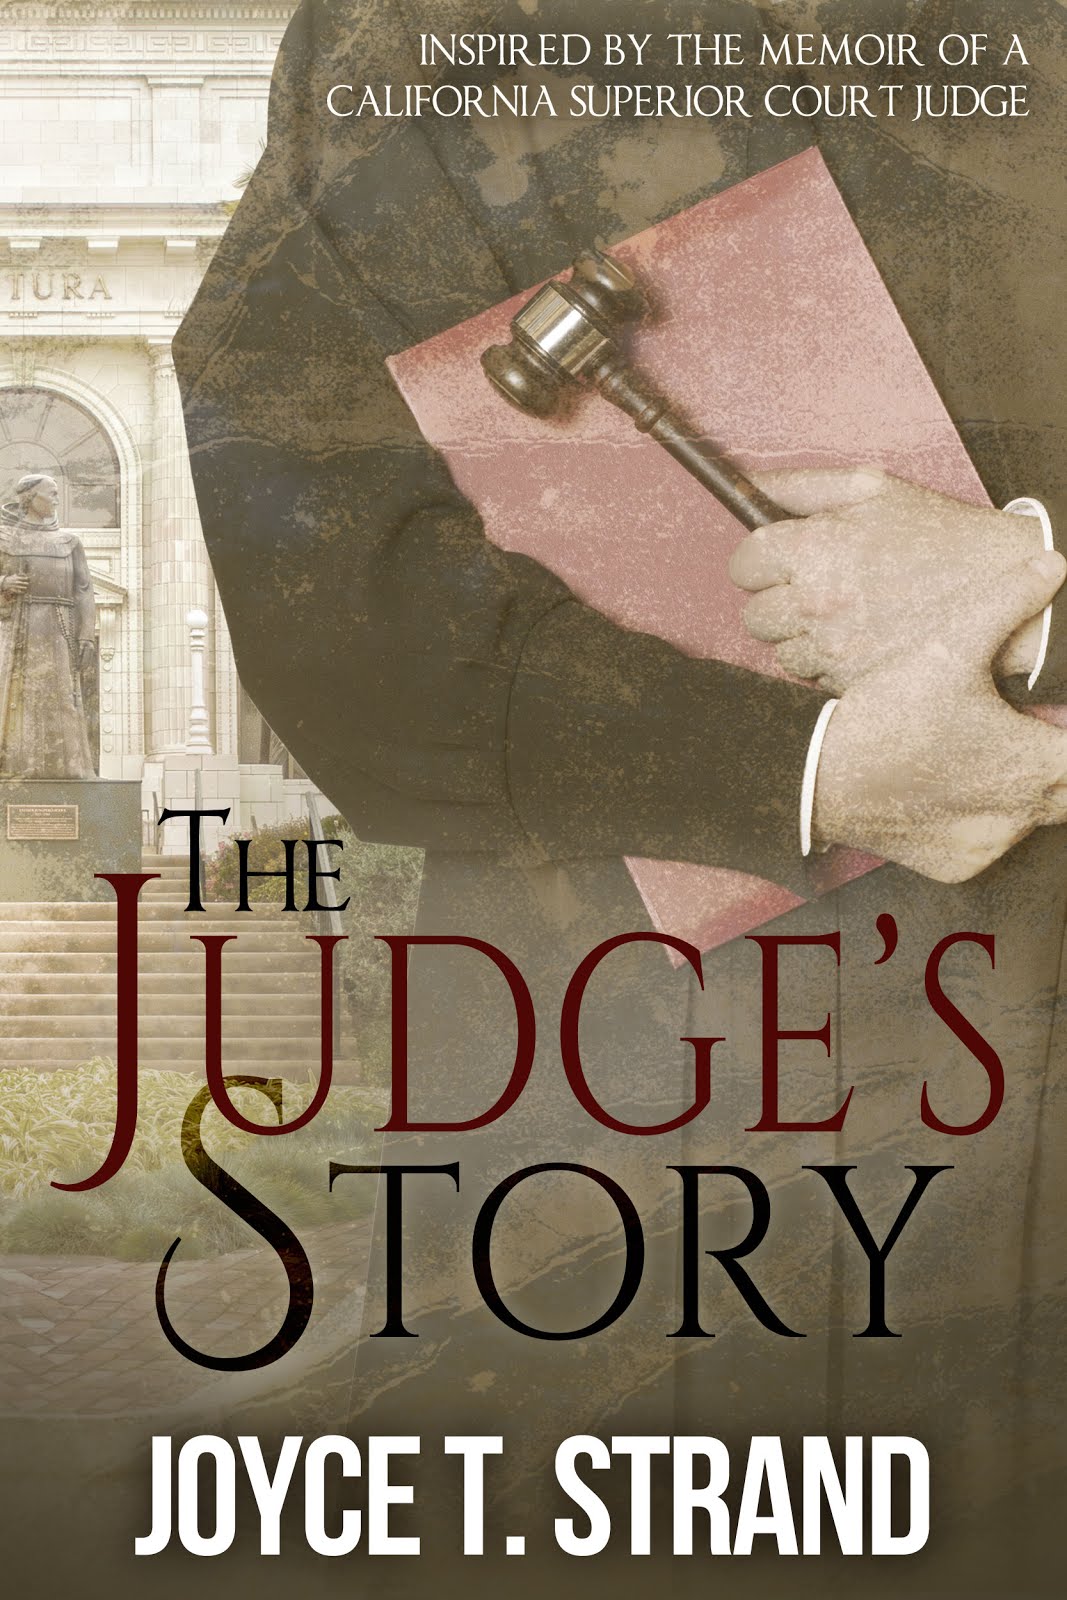 THE JUDGE'S STORY